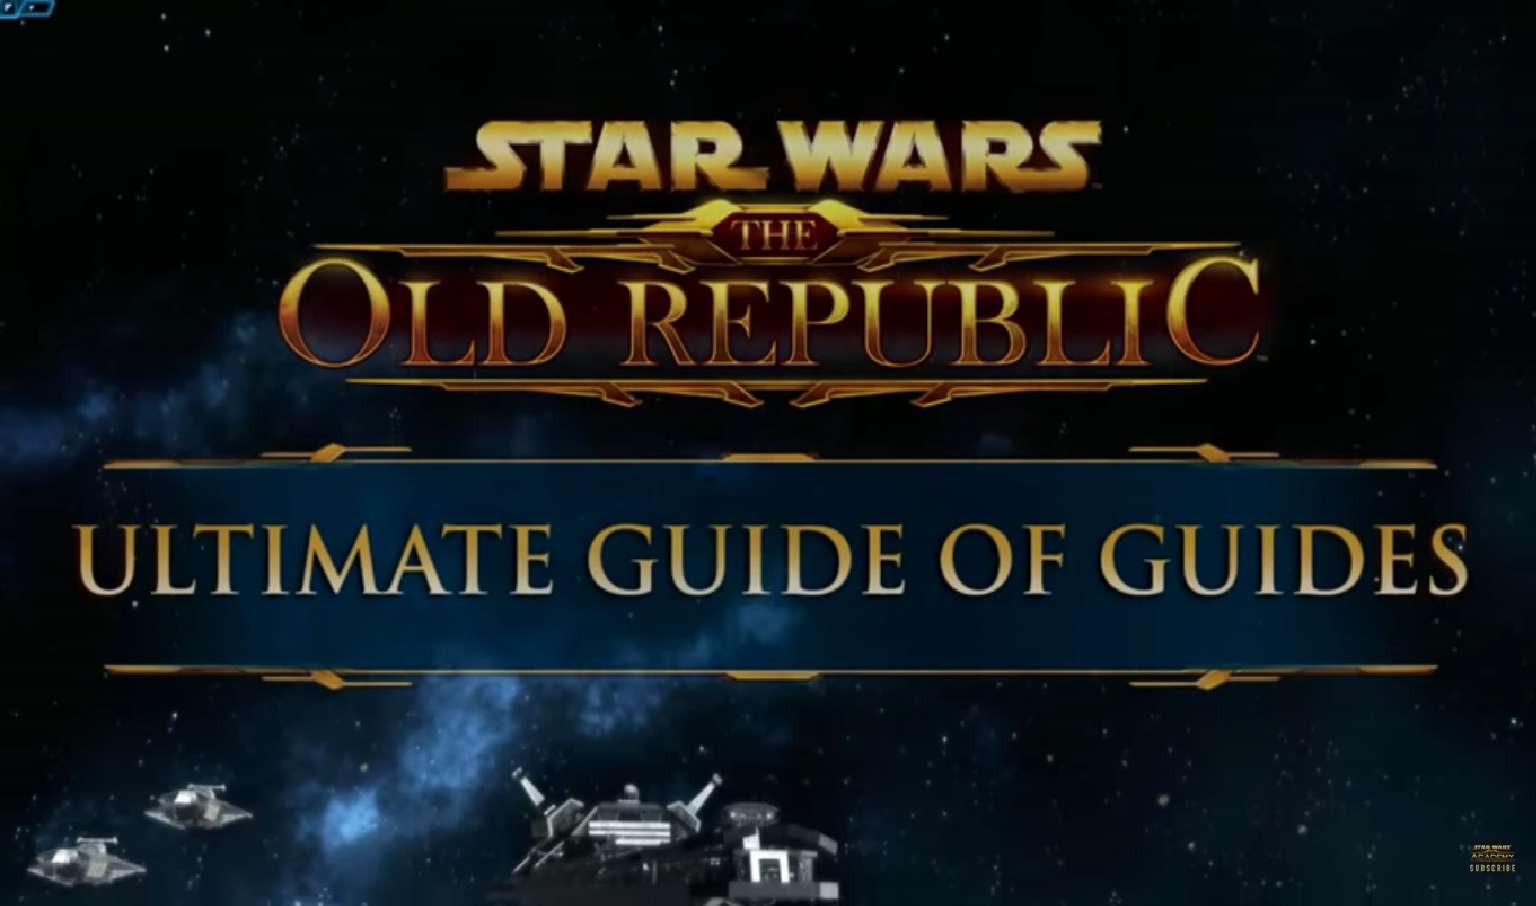 Bioware Influencer Swtorita Finishes Her Guide Of Guides Series On Star Wars The Old Republic